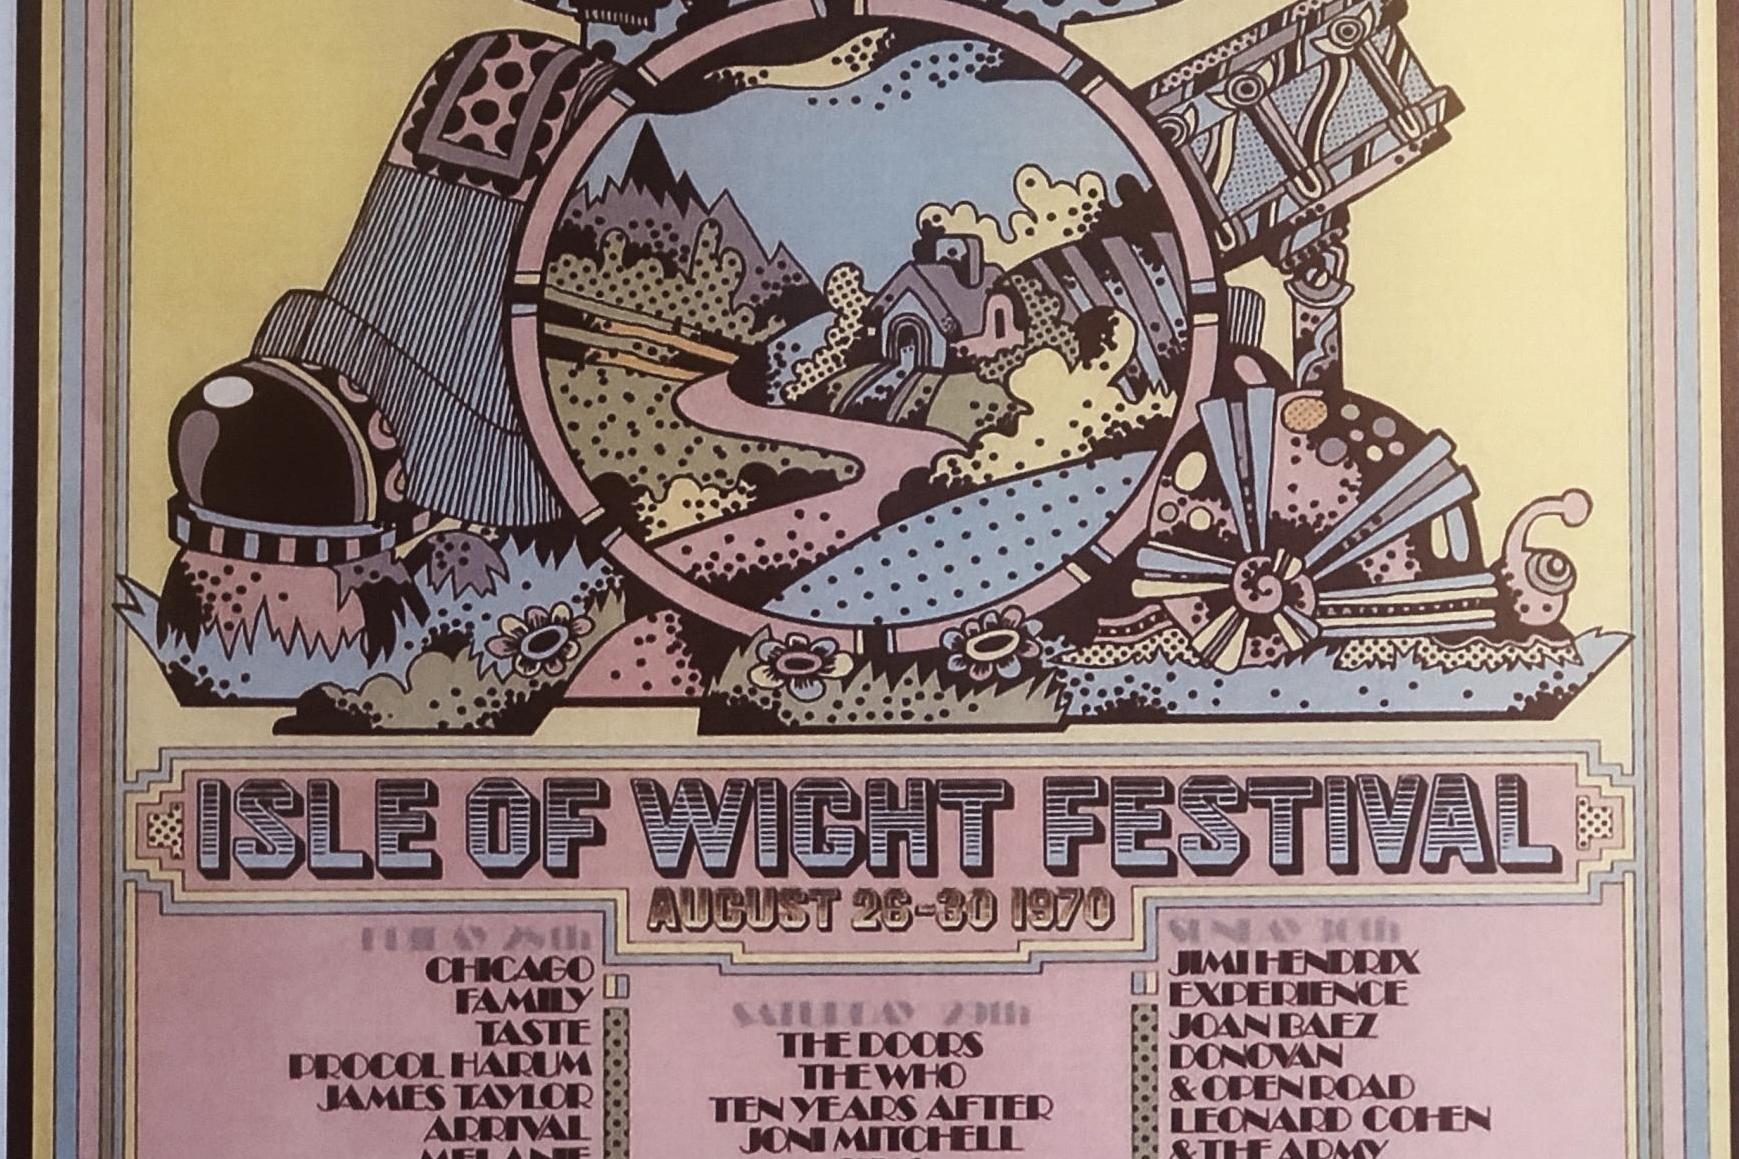 Crazy days: the official poster for the 1970 Isle of Wight Festival